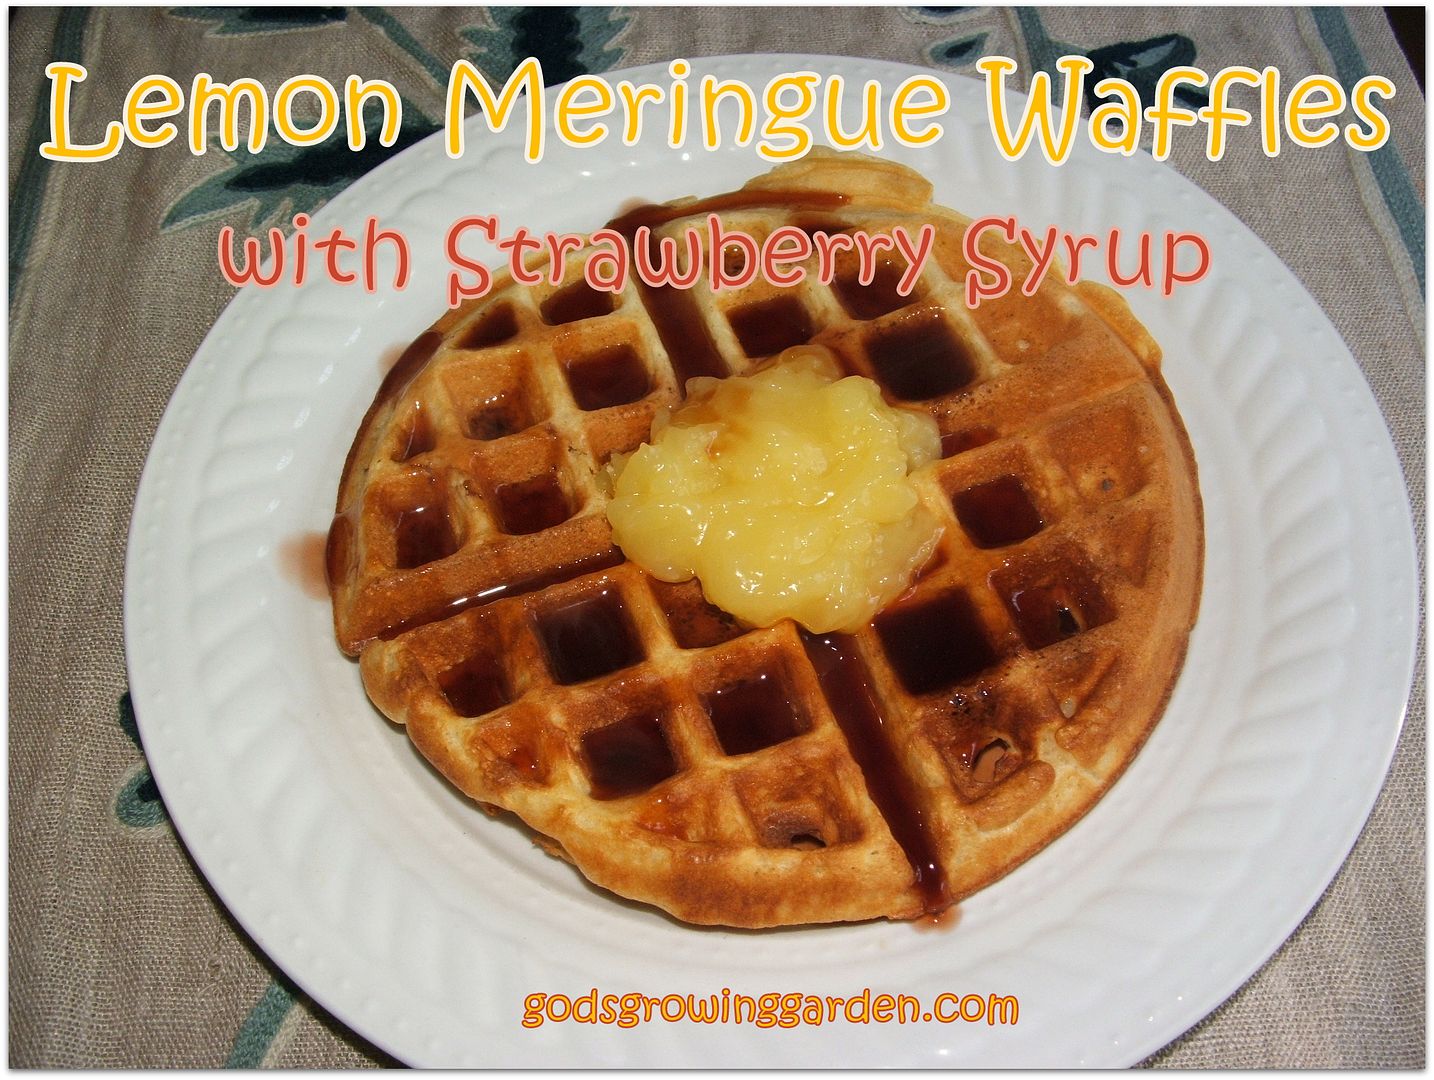 Lemon Meringue Waffles by Angie Ouellette-Tower for godsgrowinggarden.com/ photo 007_zps7f6a02ef.jpg